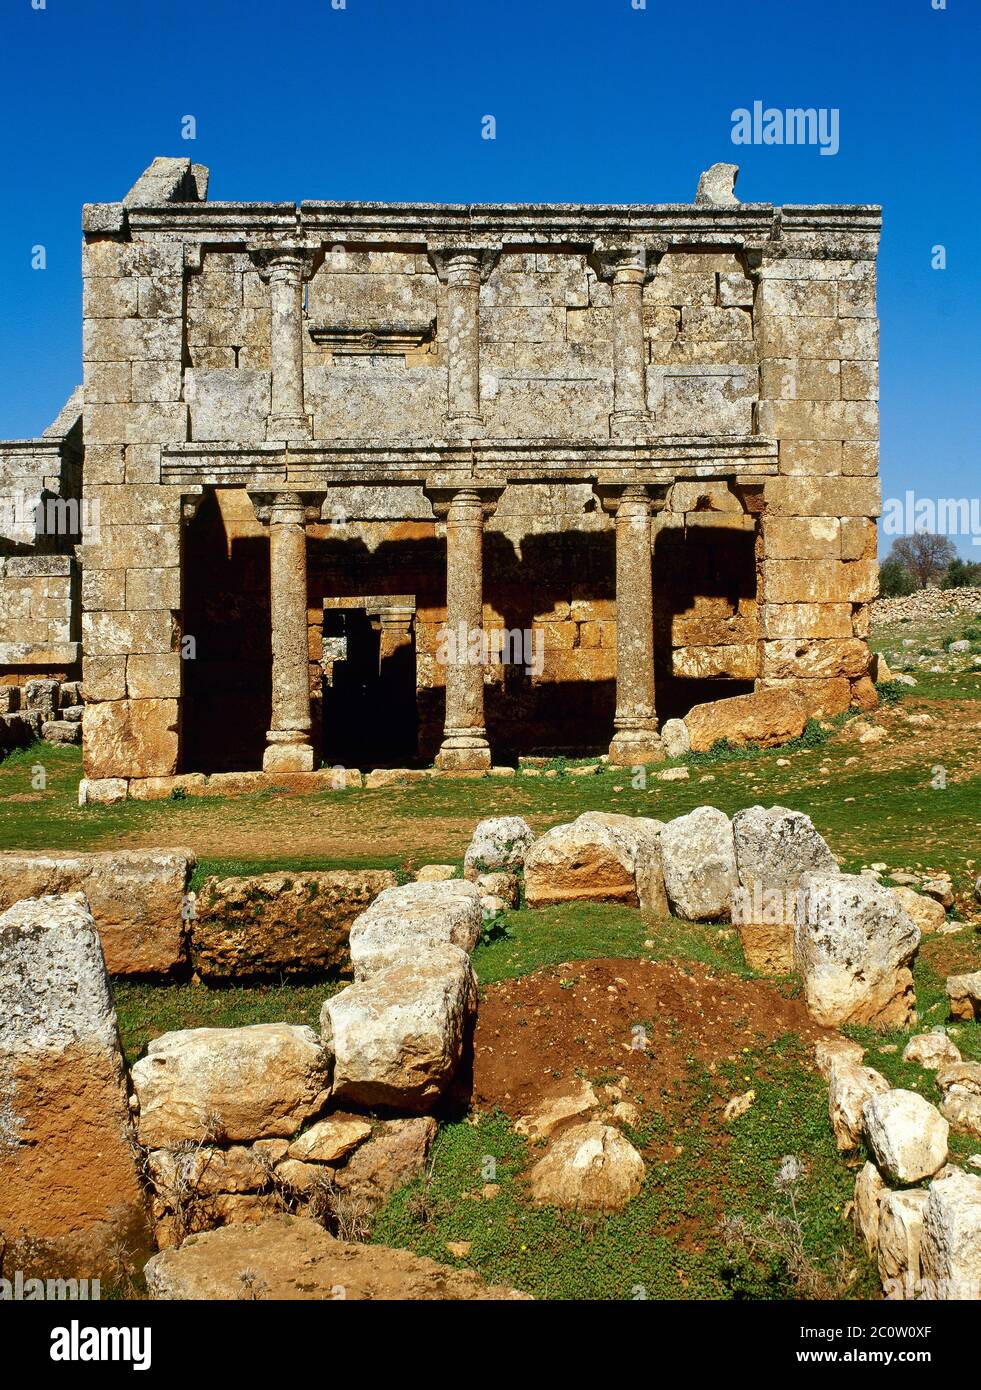 Syria. Dead Cities. Serjilla. Ancient city founded ca. 473 AD and abandoned in 7th century AD. View of the roman tavern, two story building with double portico (three columns on each floor). Exterior view. (Photo taken before the Syrian civil war). Stock Photo